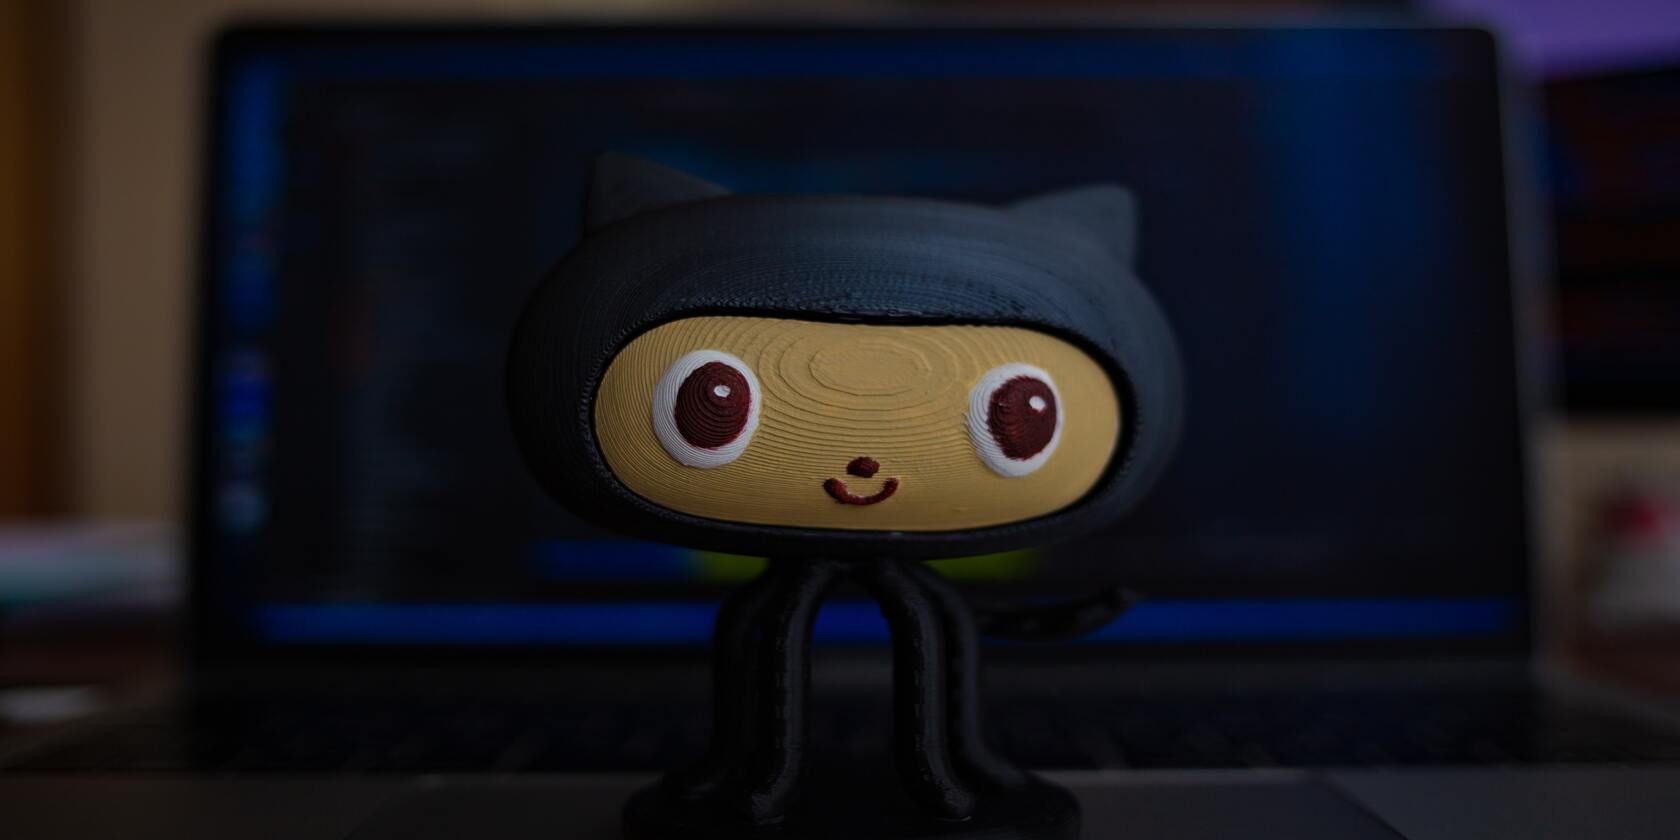 GitHub octocat plush toy in front of a blurred terminal